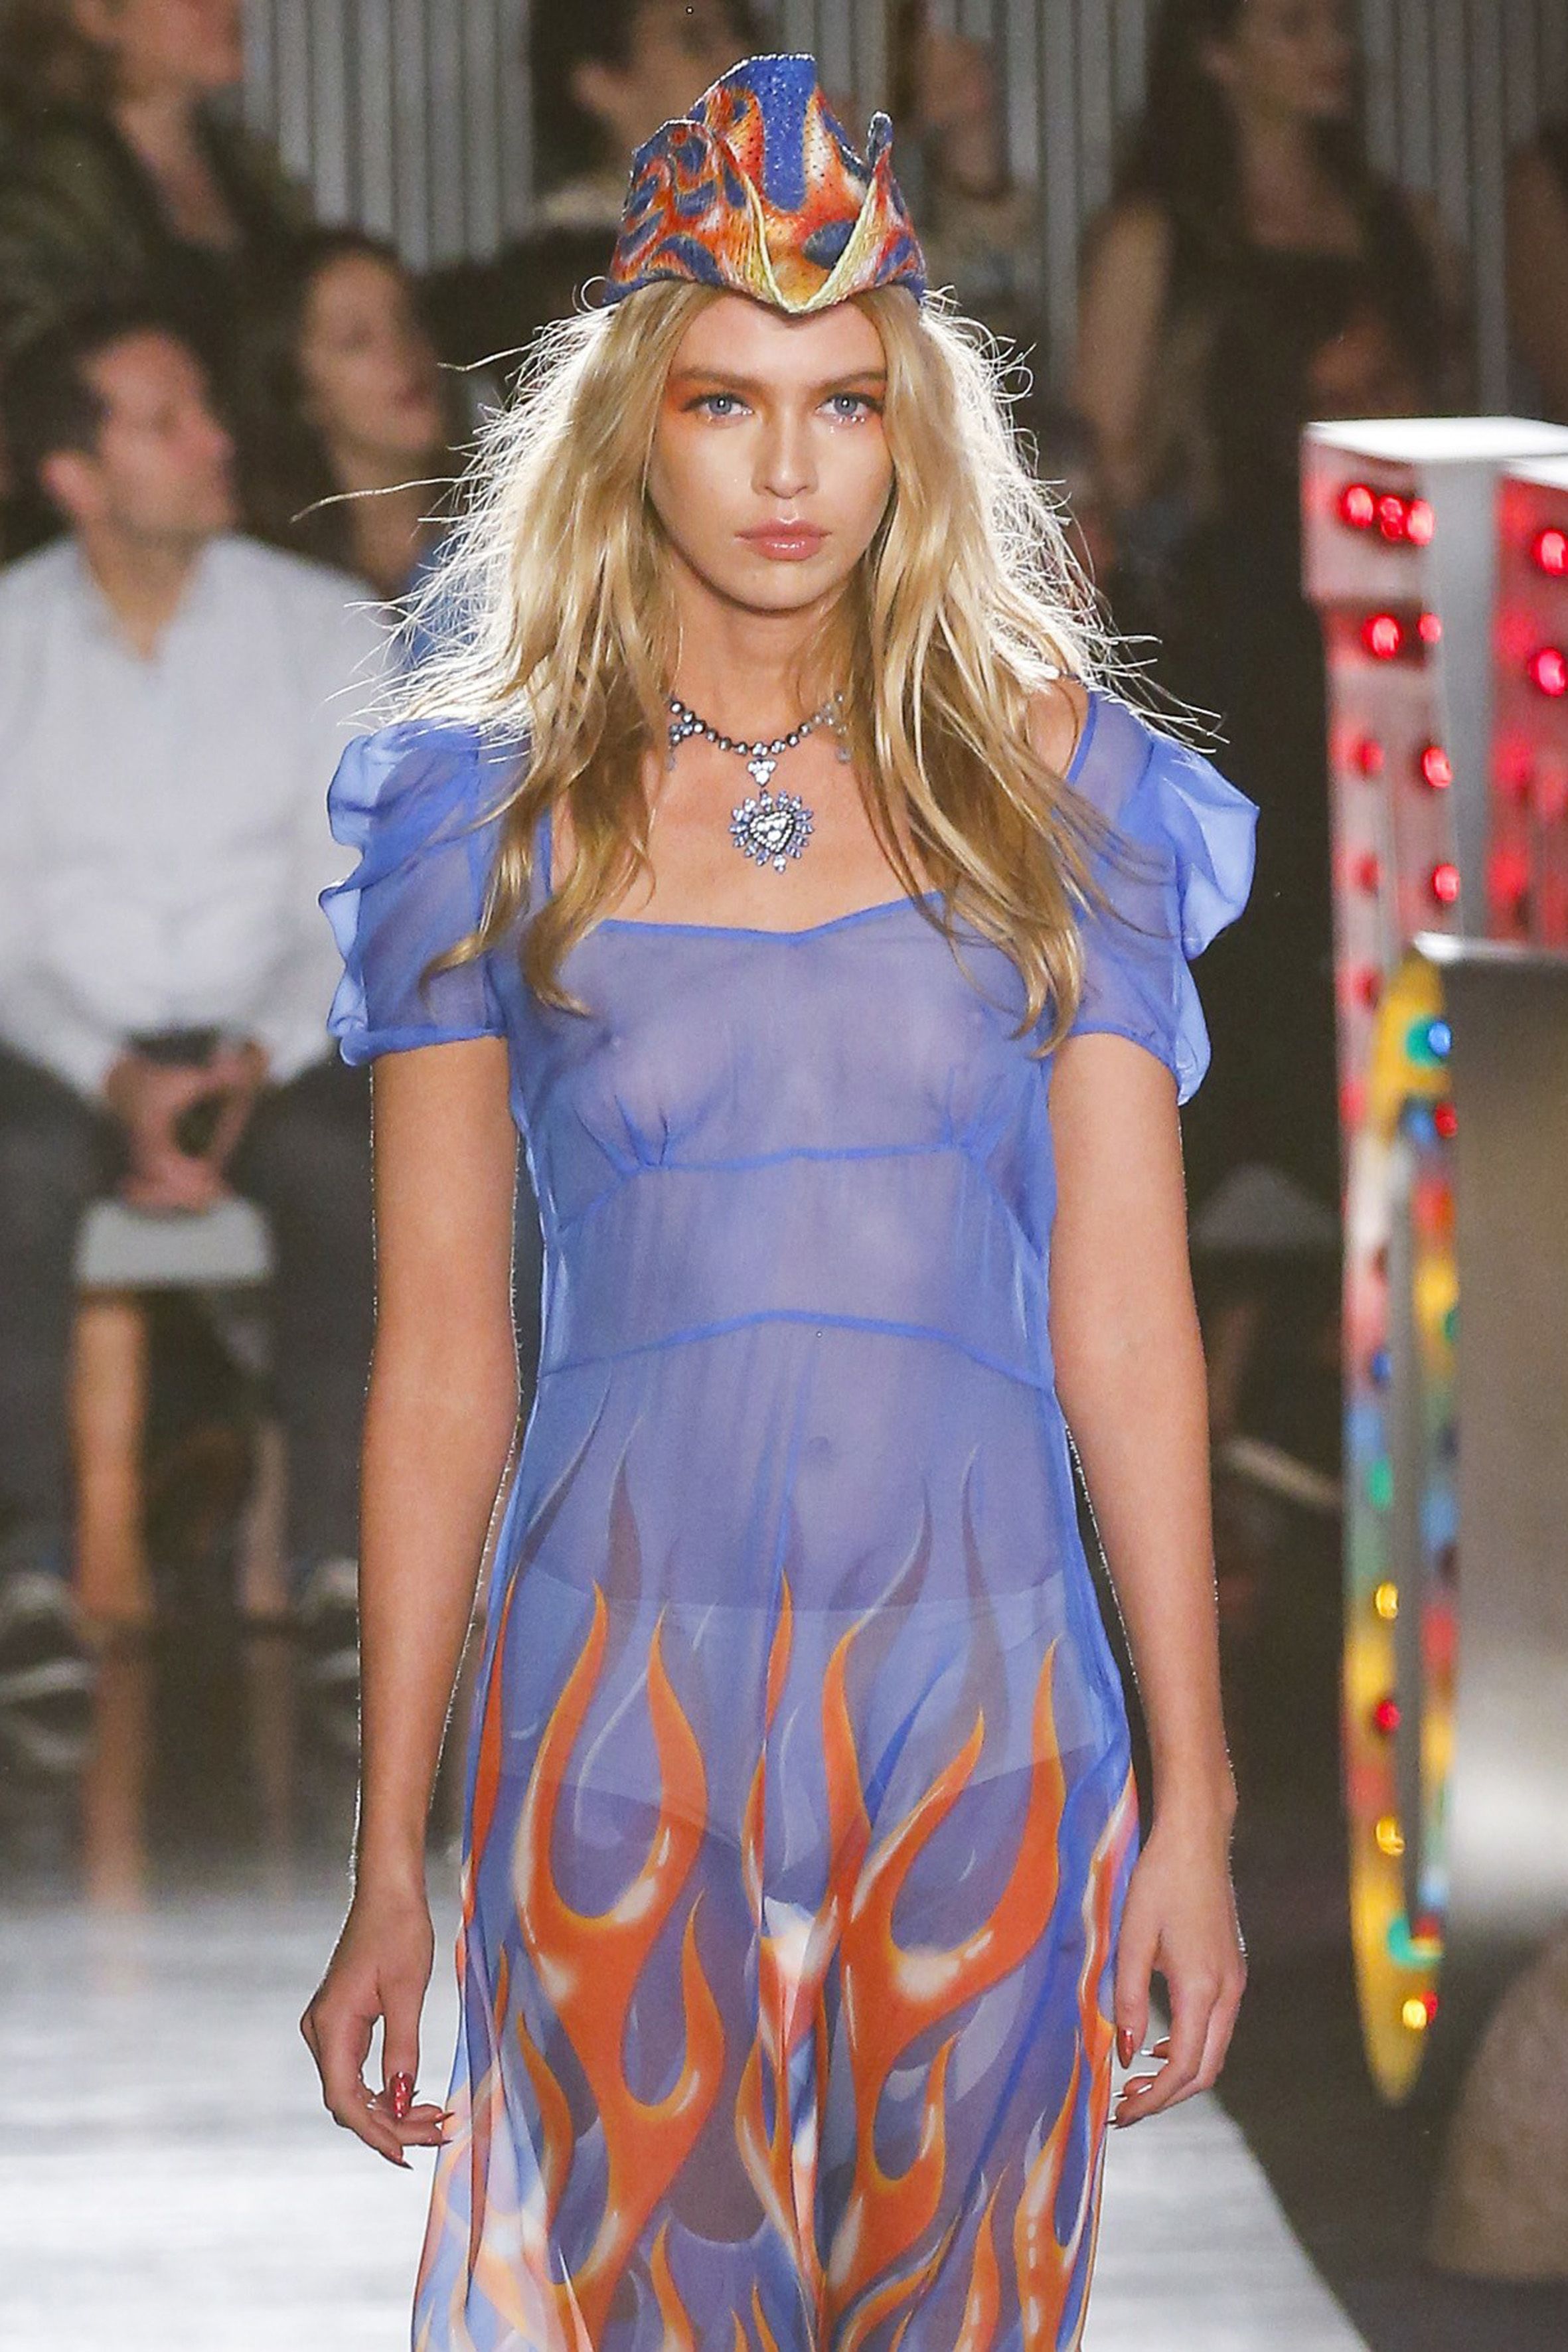 Stella Maxwell In A Transparent Get-Up #79632950